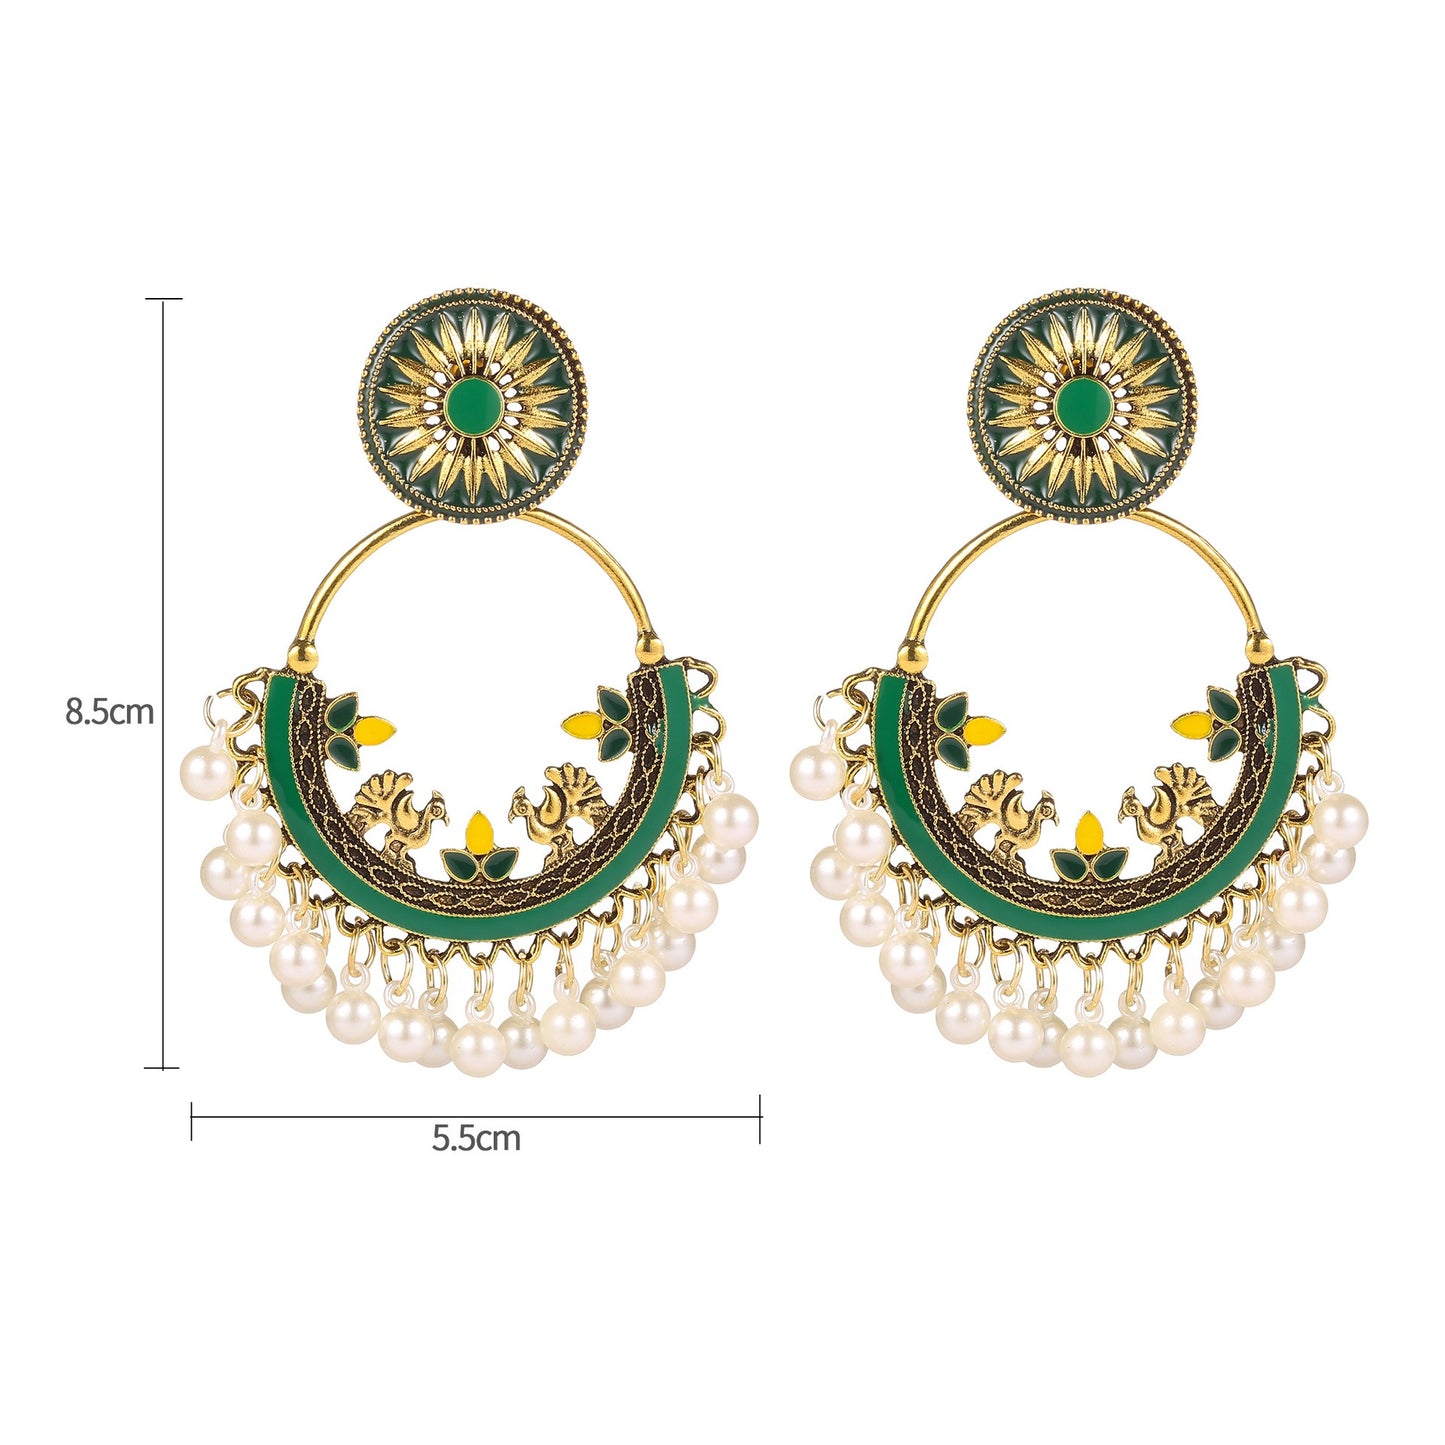 Moon alloy earrings jewelry exaggerated retro Indian style hollowed out bell pendant design sense earrings jewelry